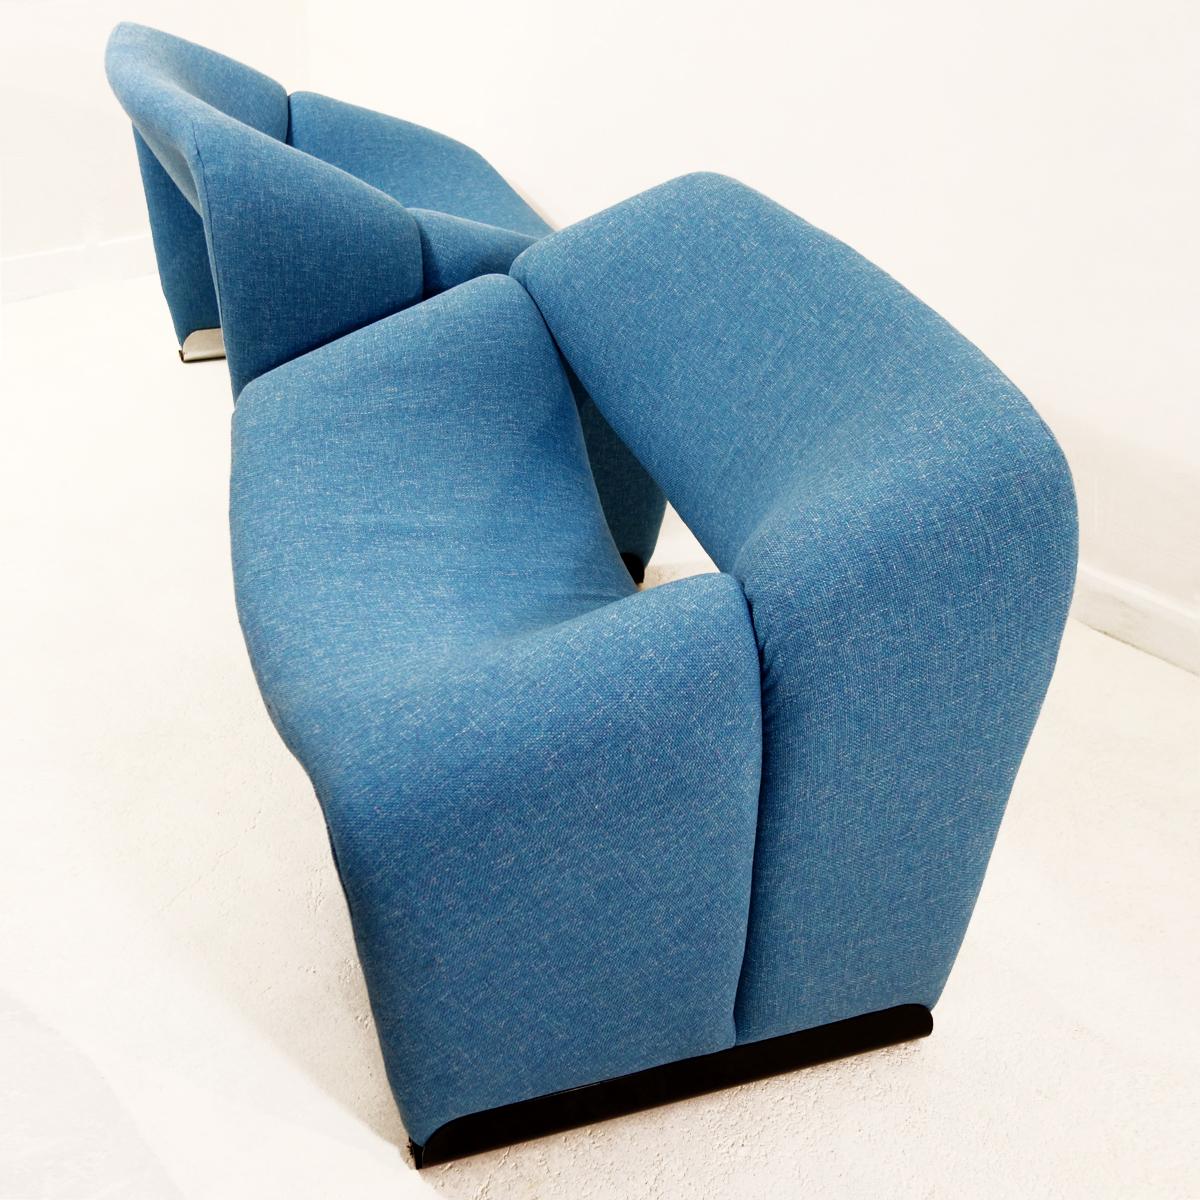 Late 20th Century Pair of Light Blue Groovy Chairs by Pierre Paulin for Artifort